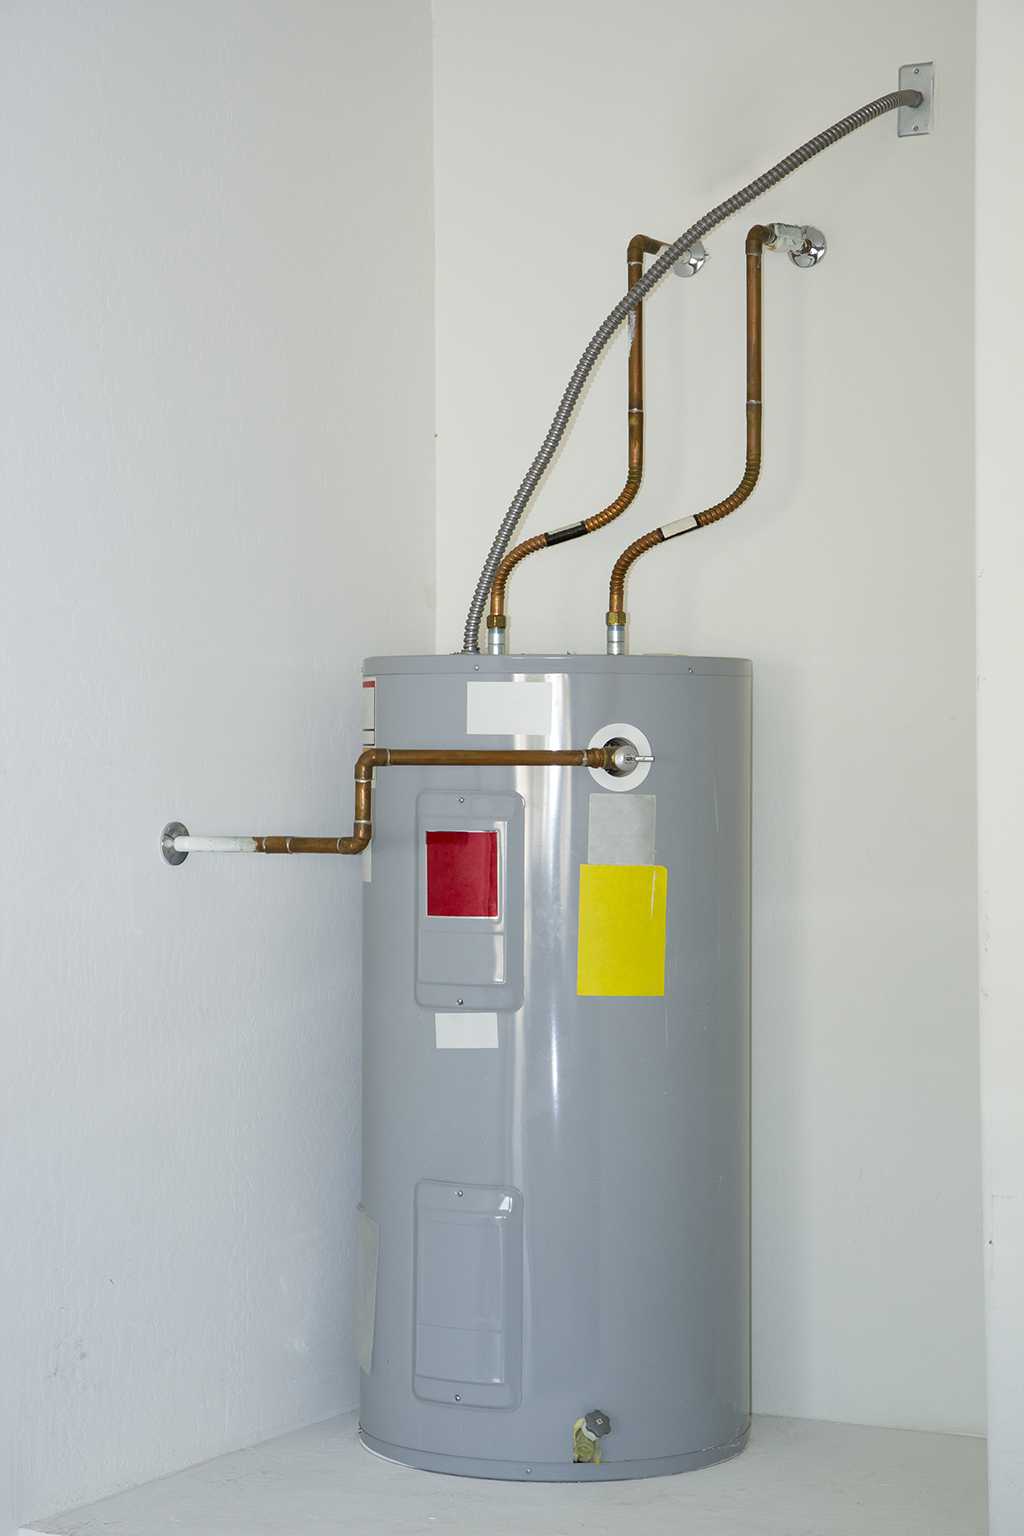 What Are The Most Common Water Heater Repair Problems In Homes? | San Antonio, TX